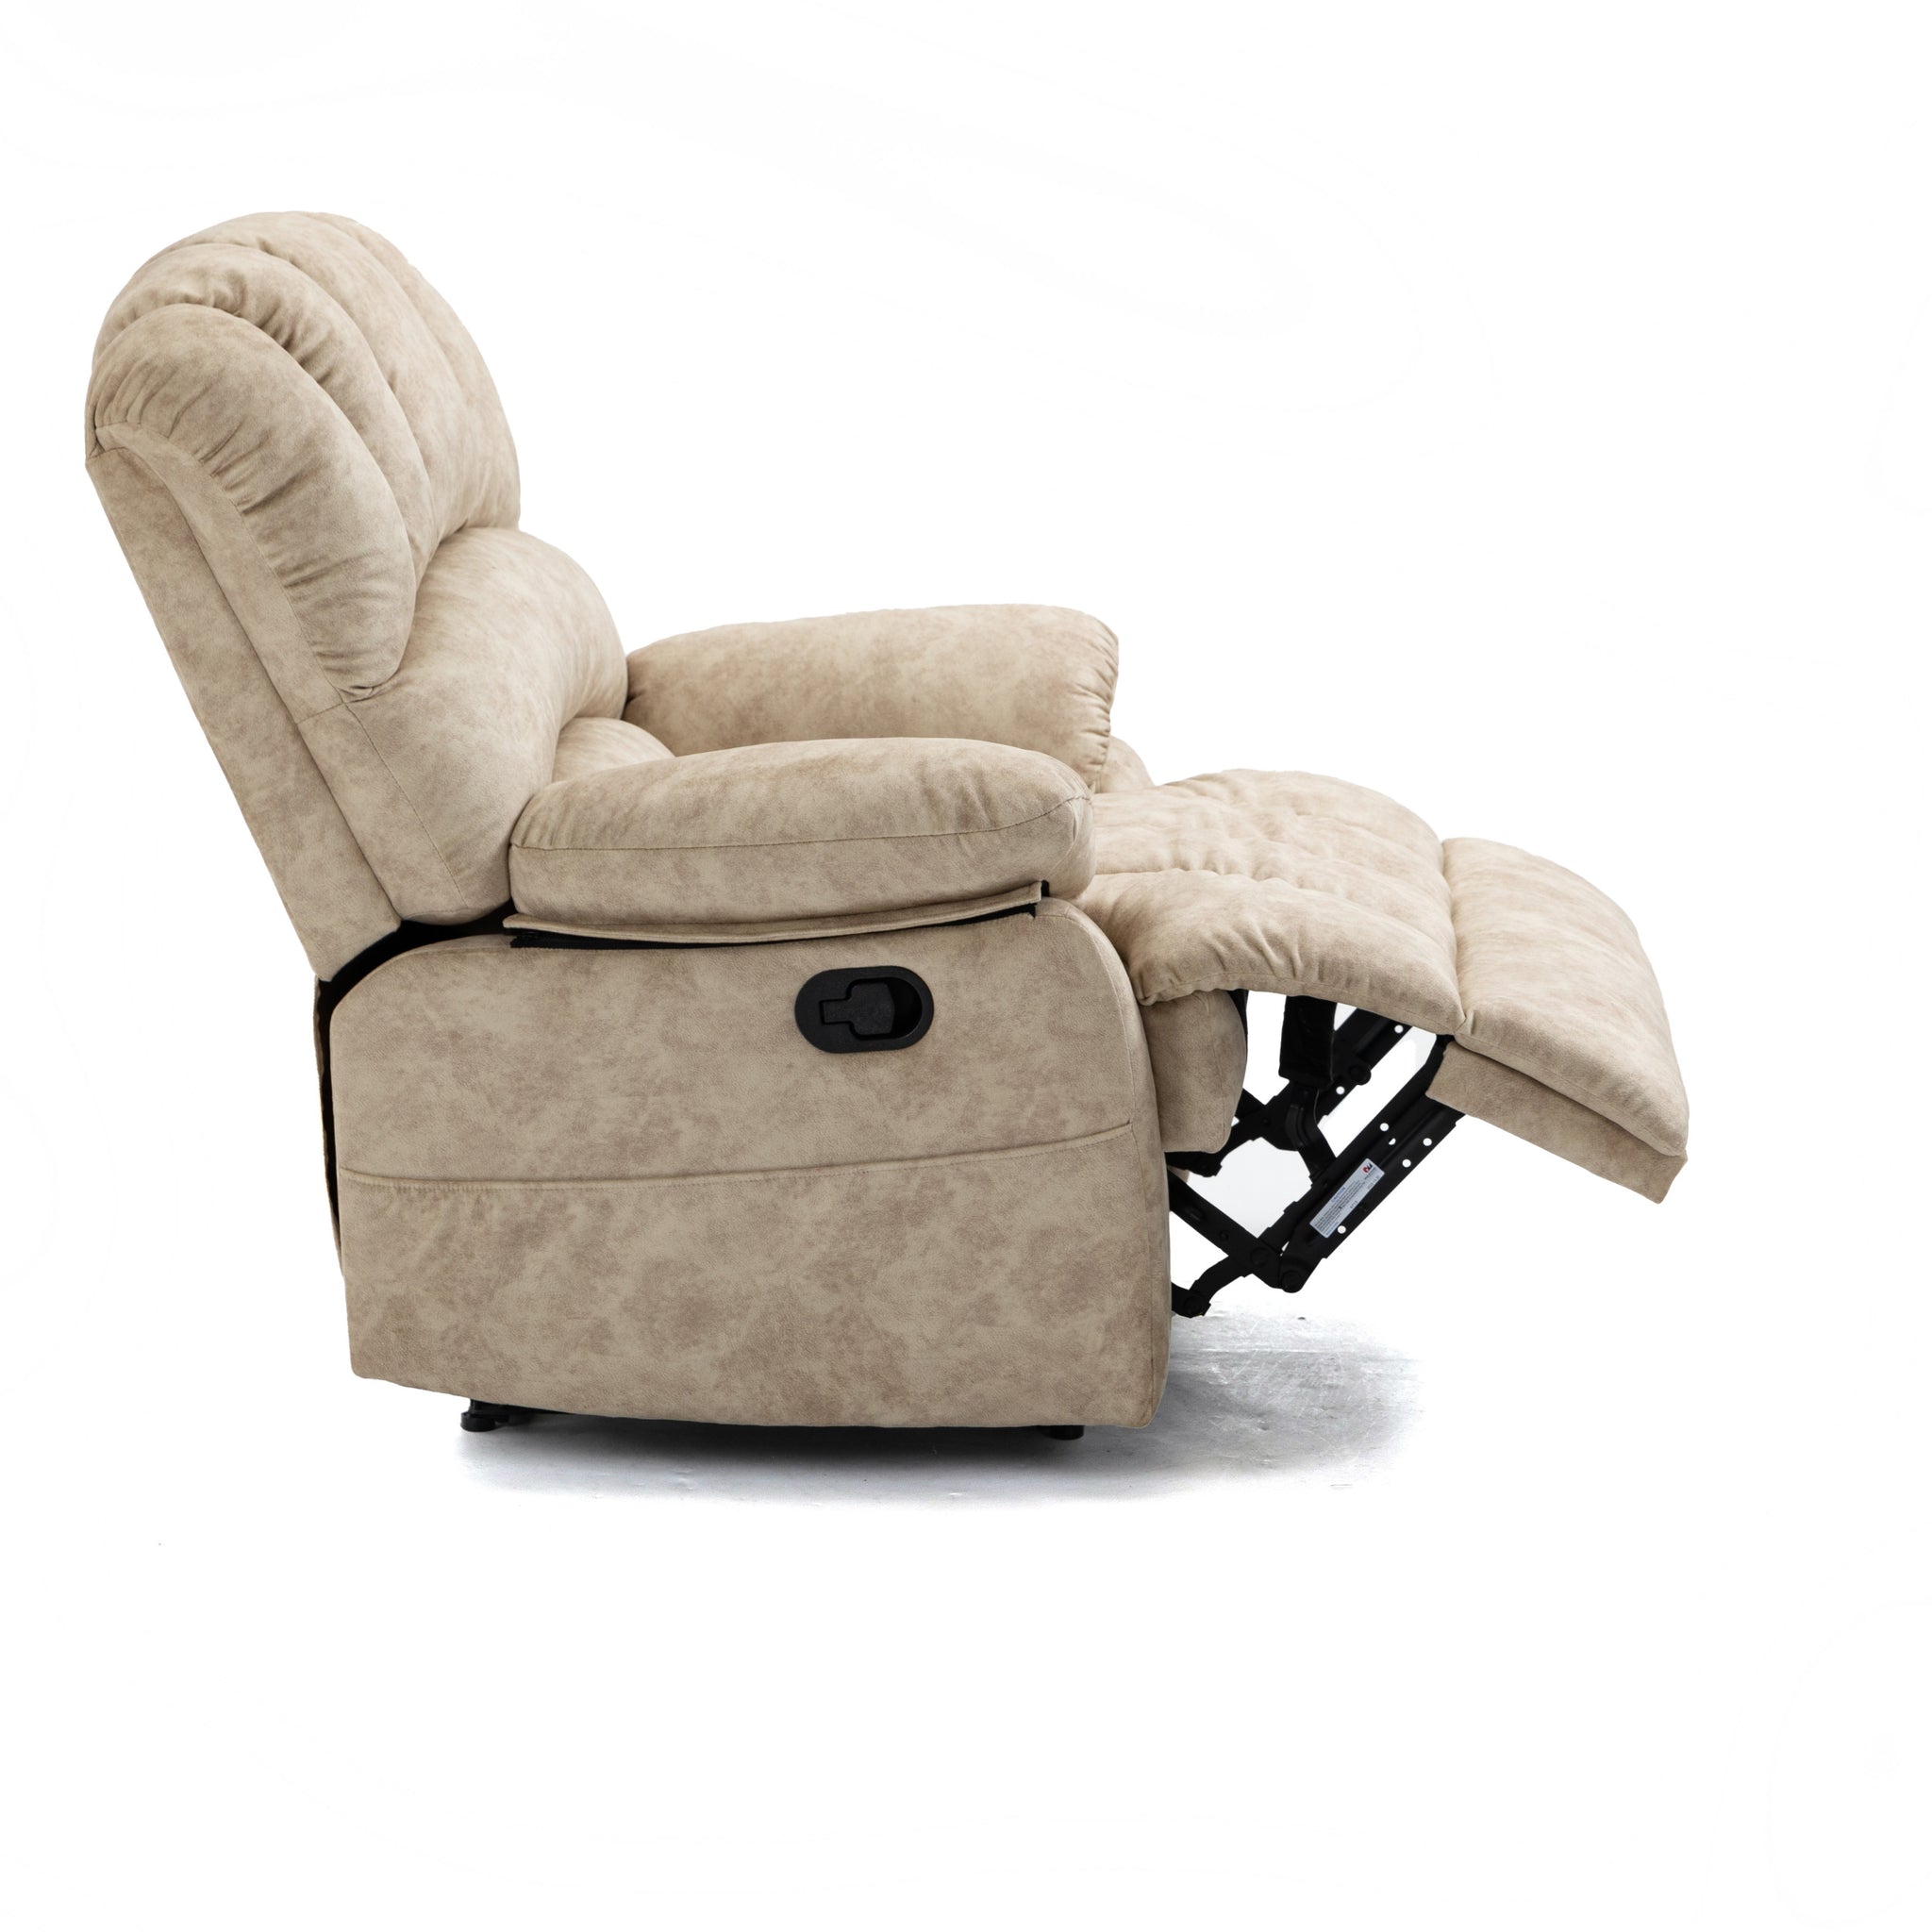 Large Manual Recliner Chair in Fabric for Living Room beige-velvet-manual-handle-metal-primary living